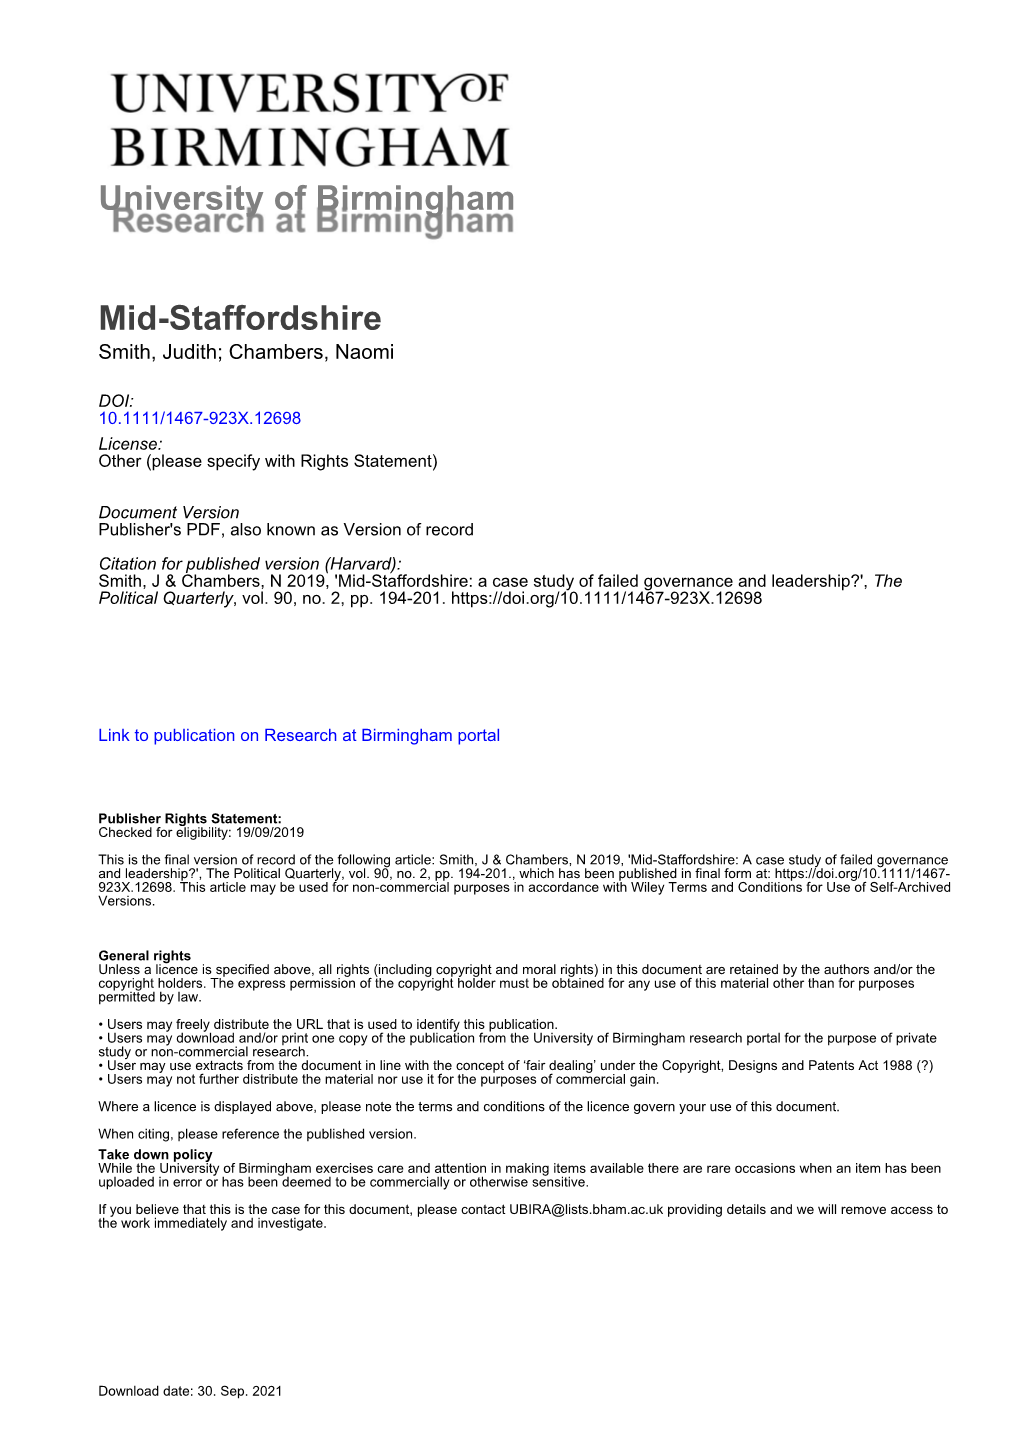 Mid Staffordshire: a Case Study of Failed Governance and Leadership?